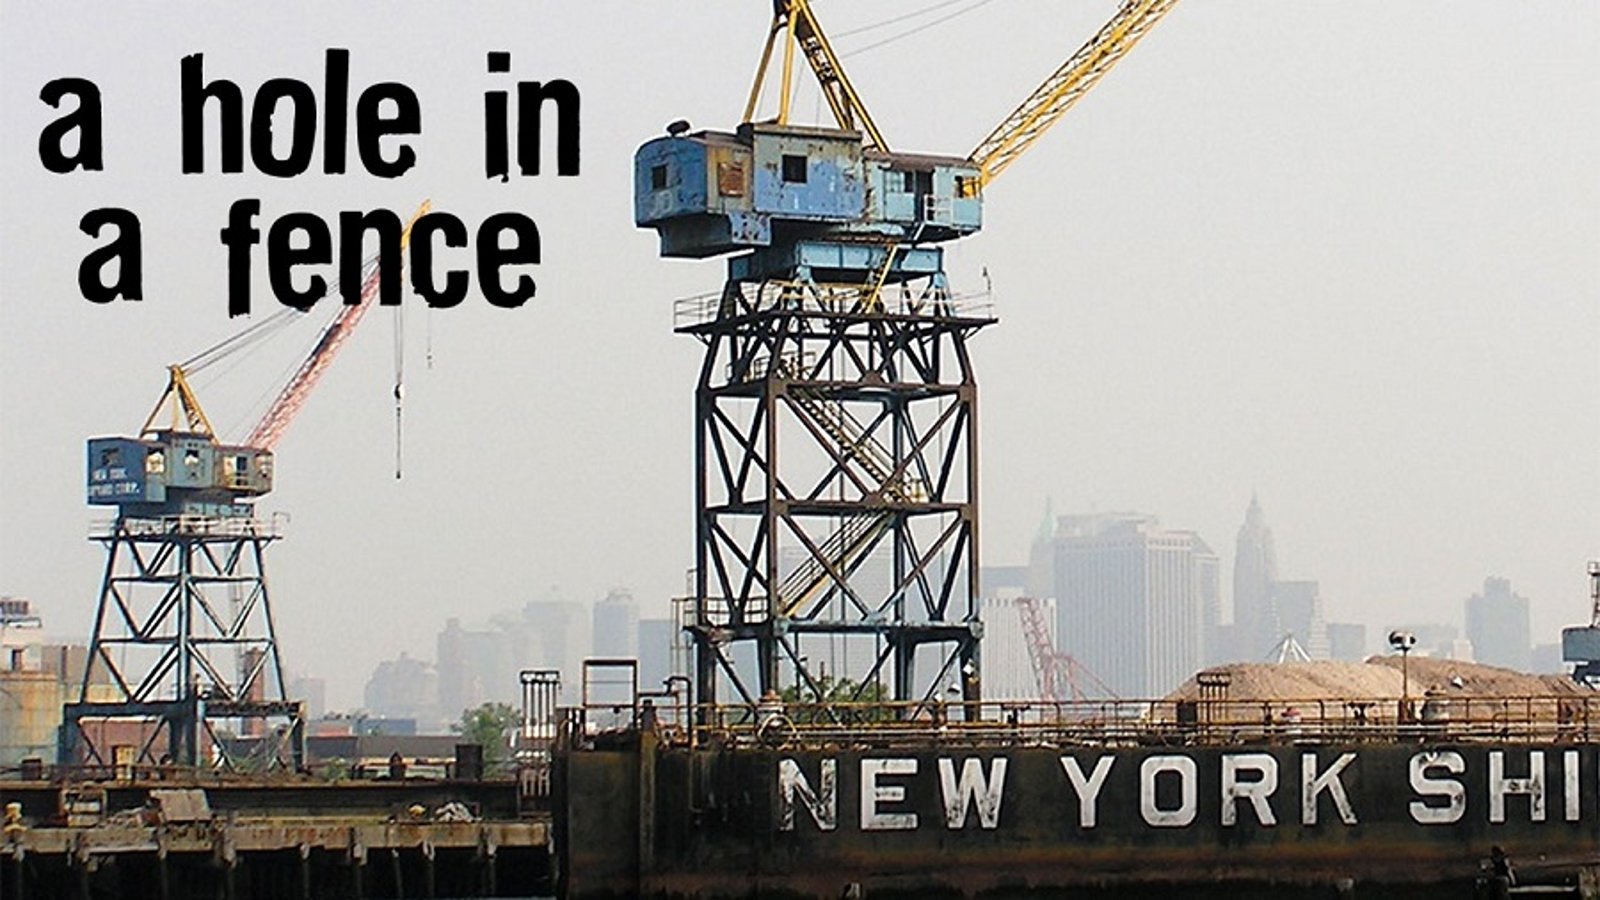 A Hole in a Fence - IKEA, Graffiti, Urban Farming, and the Gentrification of Red Hook, Brooklyn